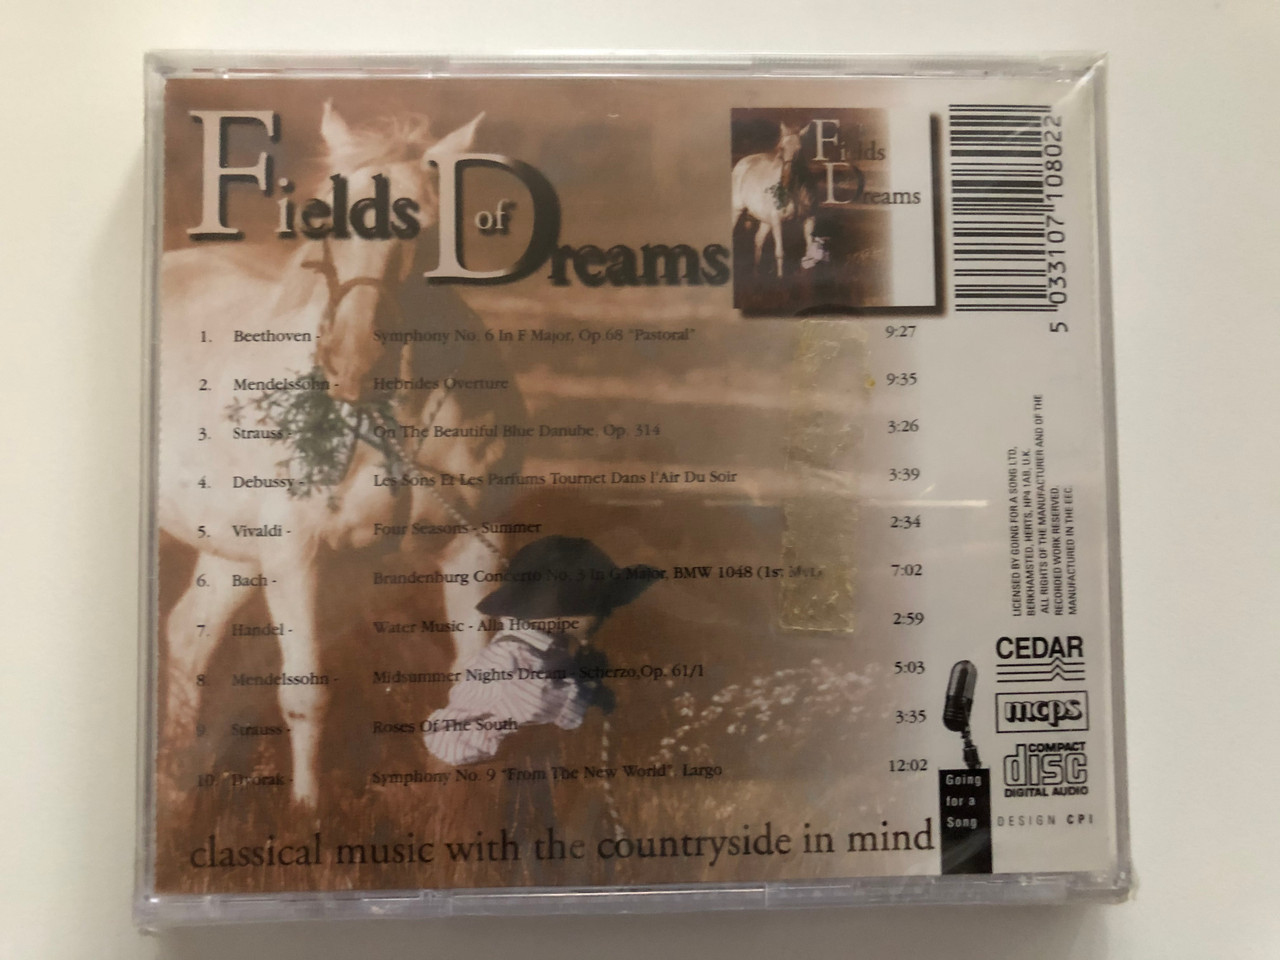 https://cdn10.bigcommerce.com/s-62bdpkt7pb/products/31091/images/183130/Fields_Of_Dreams_-_Classical_Music_With_The_Countryside_In_Mind_Including_Vivaldi_-_Four_Seasons_-_Summer_Handel_-_Water_Music_Strauss_-_Roses_Of_The_South_Mendelssohn_-_Midsummer_Night_3__02587.1625124228.1280.1280.JPG?c=2